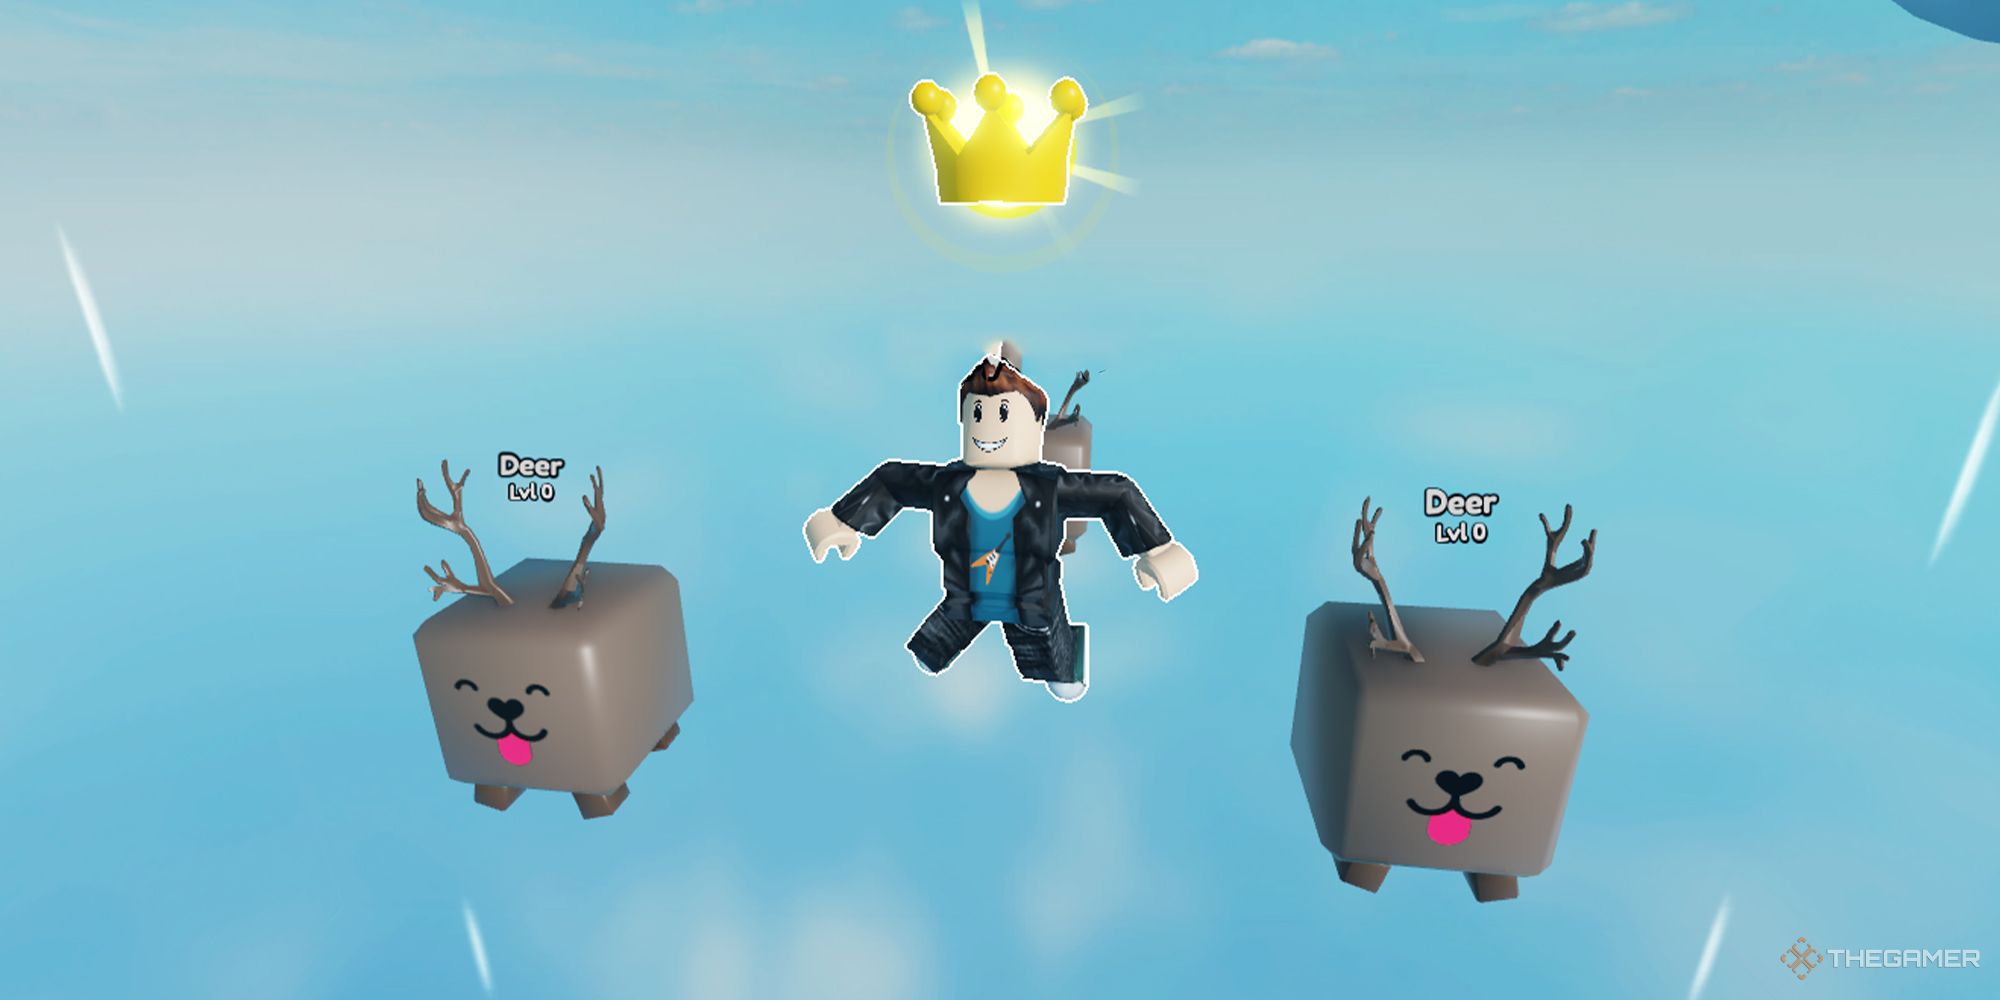 A Roblox character and his pets soar in the air in Jump Clicker 2.